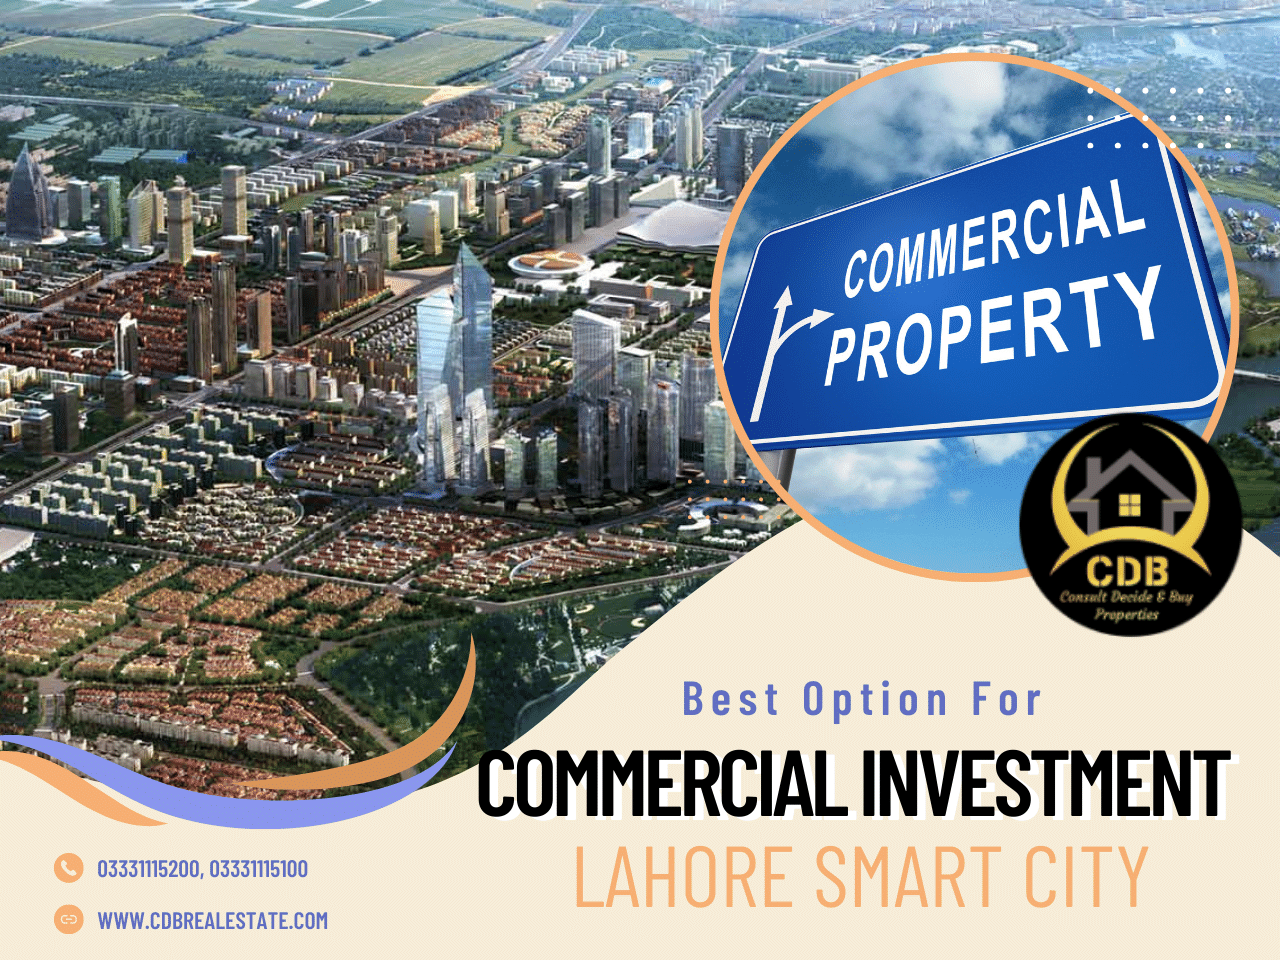 The Best Option For Commercial Investment Lahore Smart City